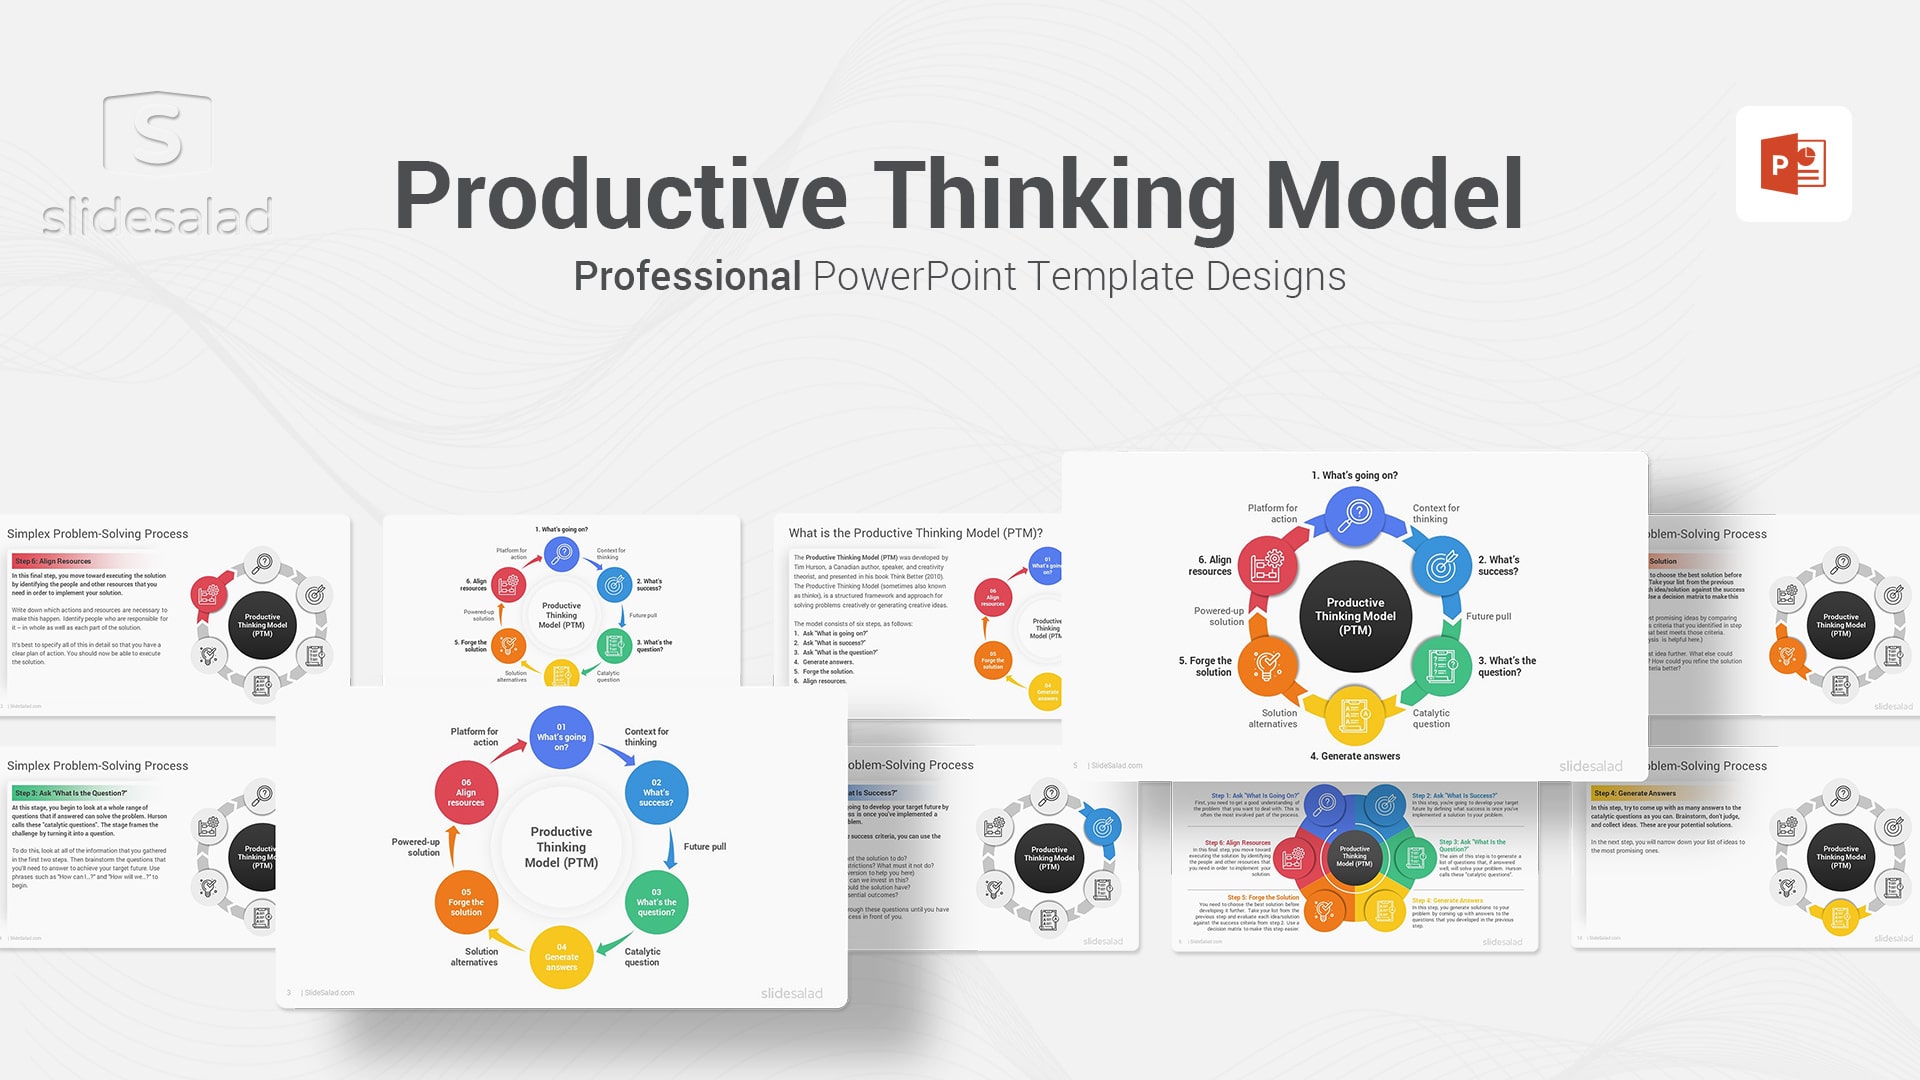 Productive Thinking Model PowerPoint Template - The Best Problem Solving PPT Template to Discover the Best Way to Think for Maximum Output